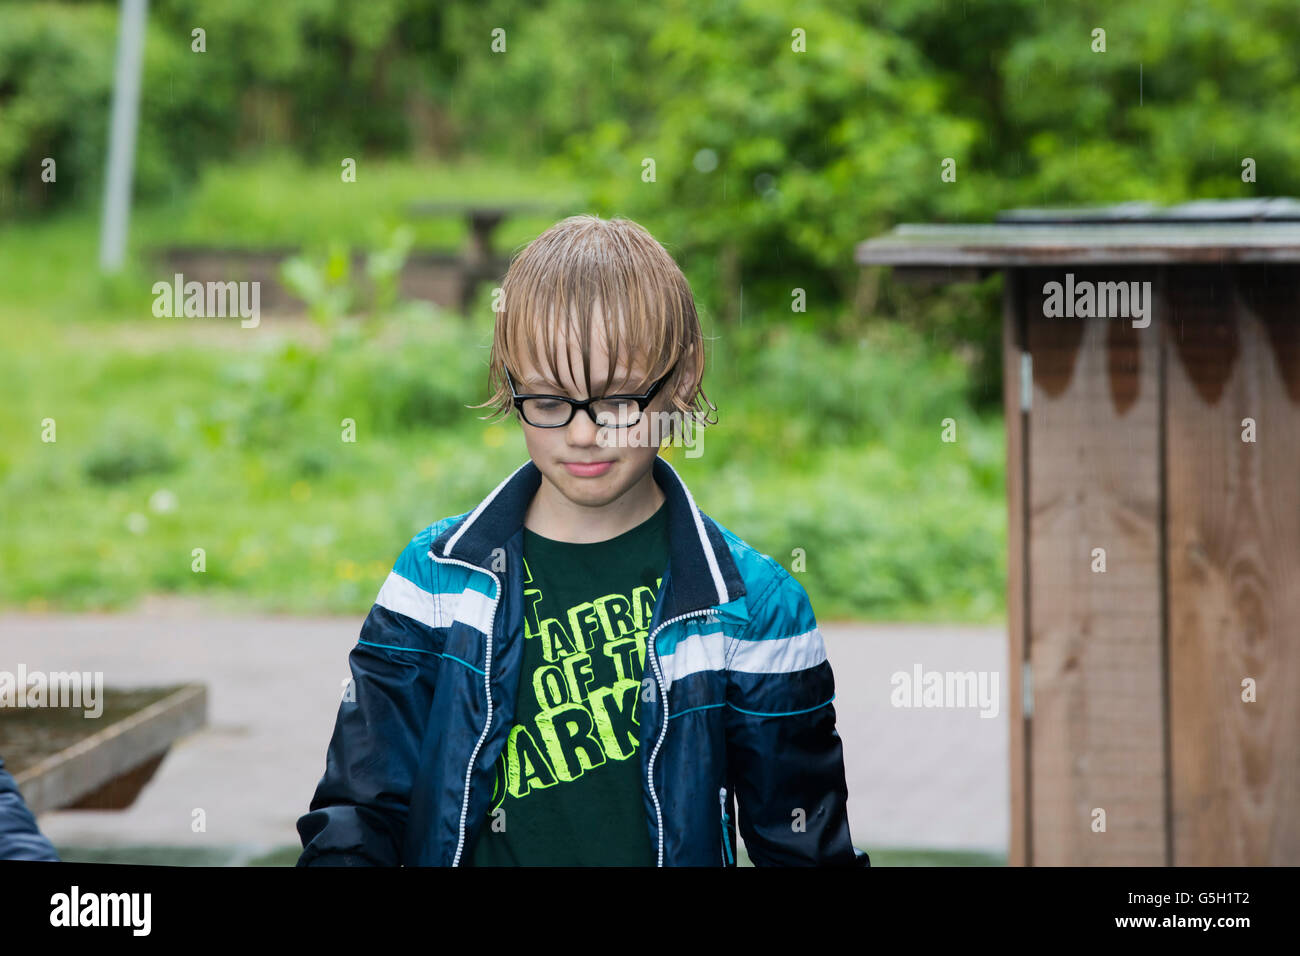 Portrait of a young boy with rain coat and wet hair outside wearing glasses. Stock Photo